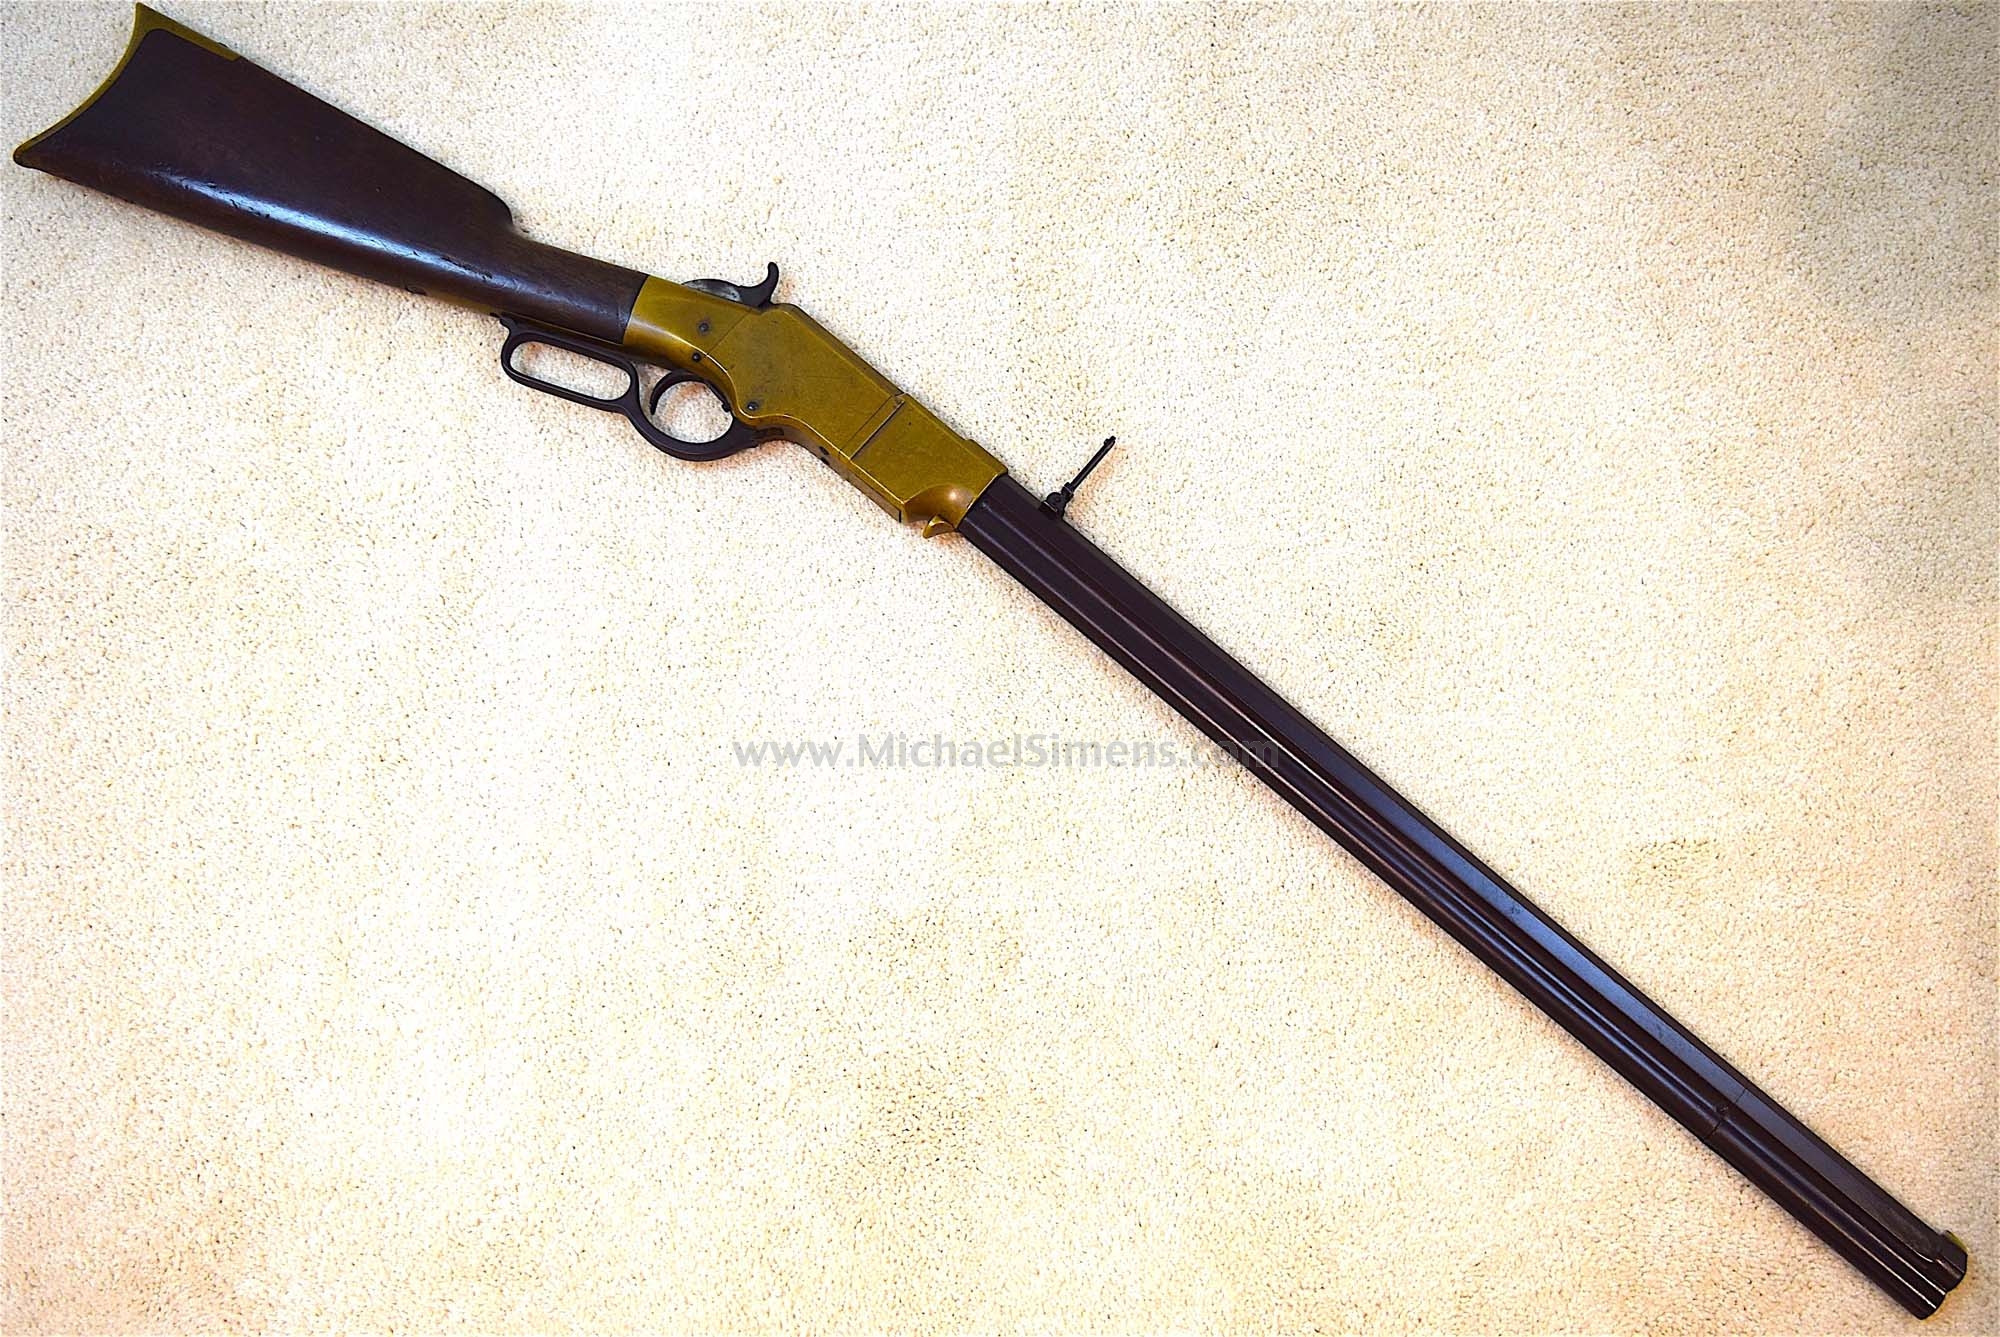 UNTOUCHED AND IDENTIFIED HENRY RIFLE